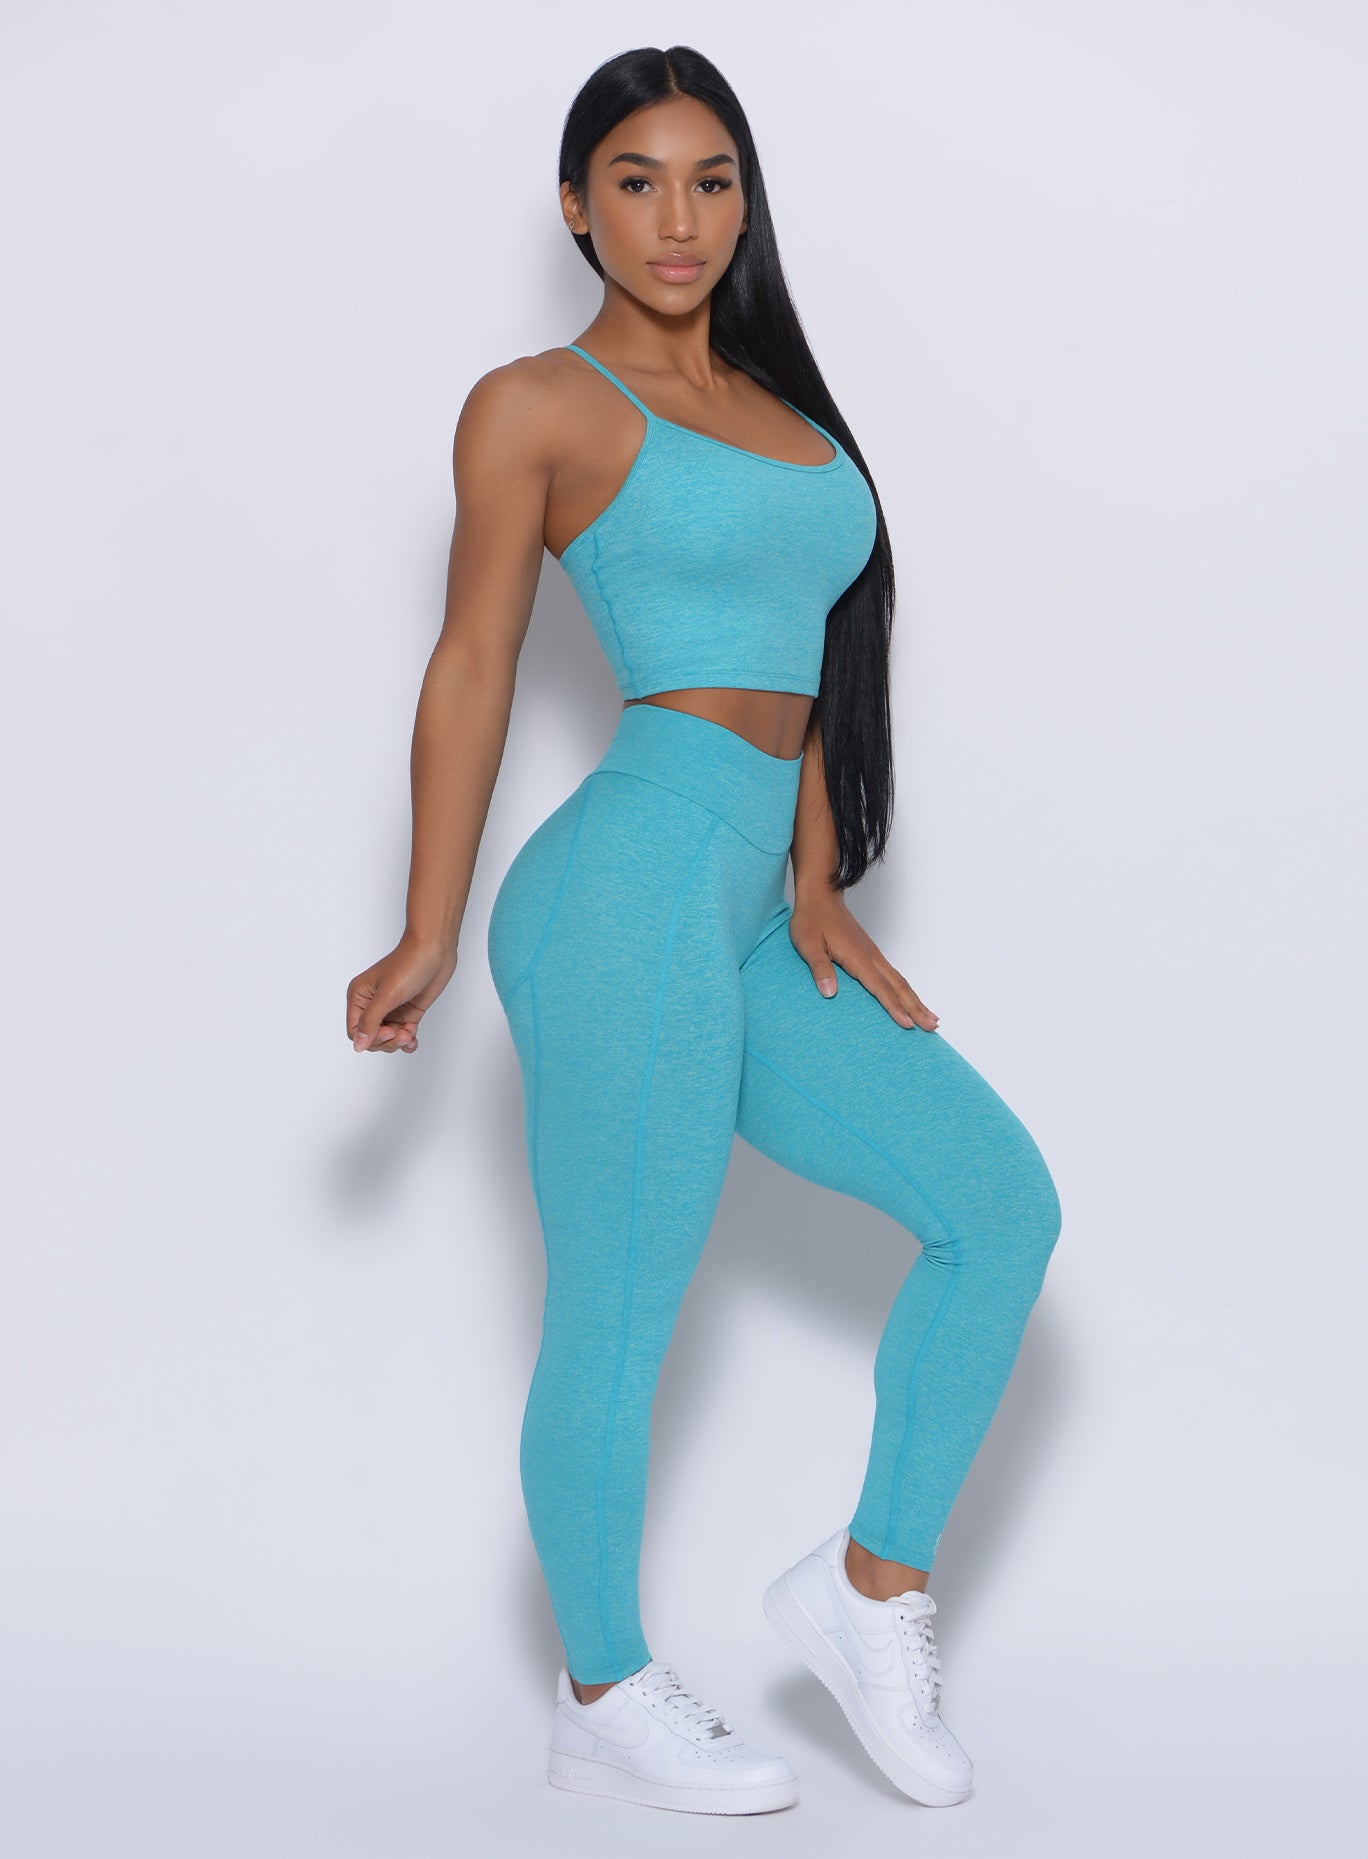 Right side view of a model angled right and facing to her right wearing our relax sports bra in crystal blue color and a matching leggings 